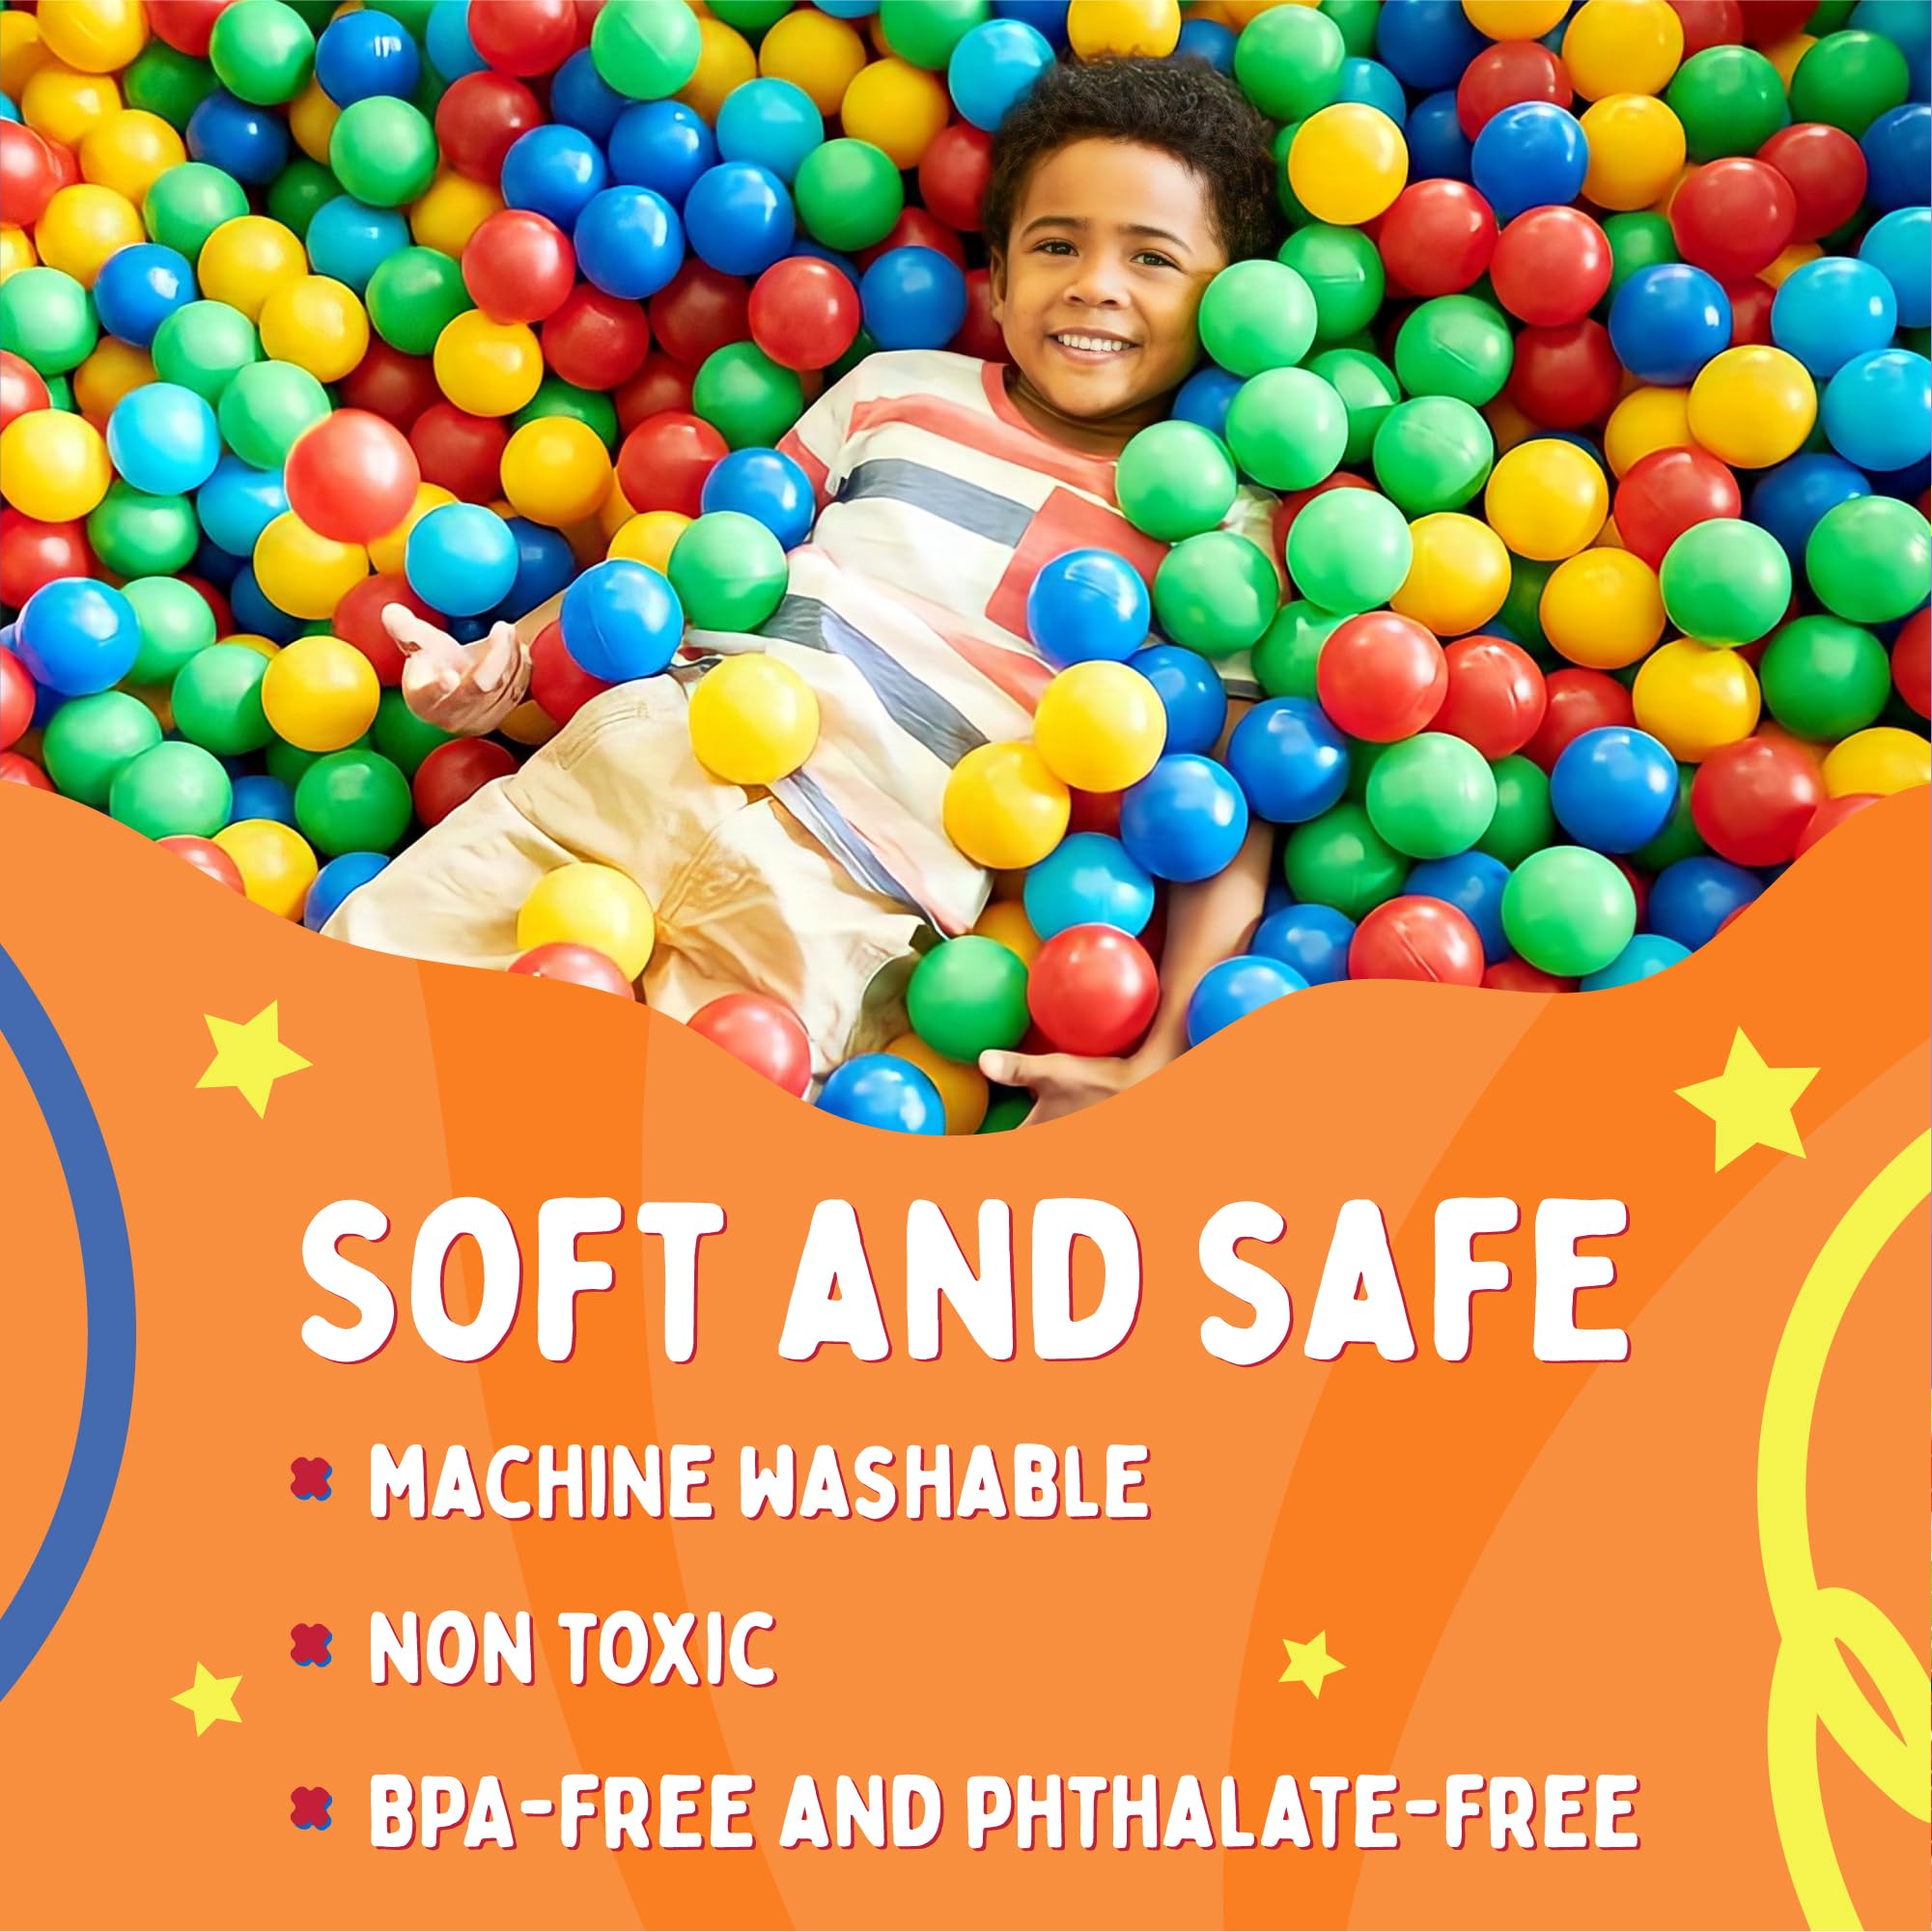 Playz 500 Soft Plastic Mini Ball Pit Balls w/ 8 Vibrant Colors - Crush Proof, Non Toxic, Safe Assorted Bulk Plastic Balls for Toddler, Baby & Kids Playpen, Play Tents Indoor & Outdoor Playtime Fun